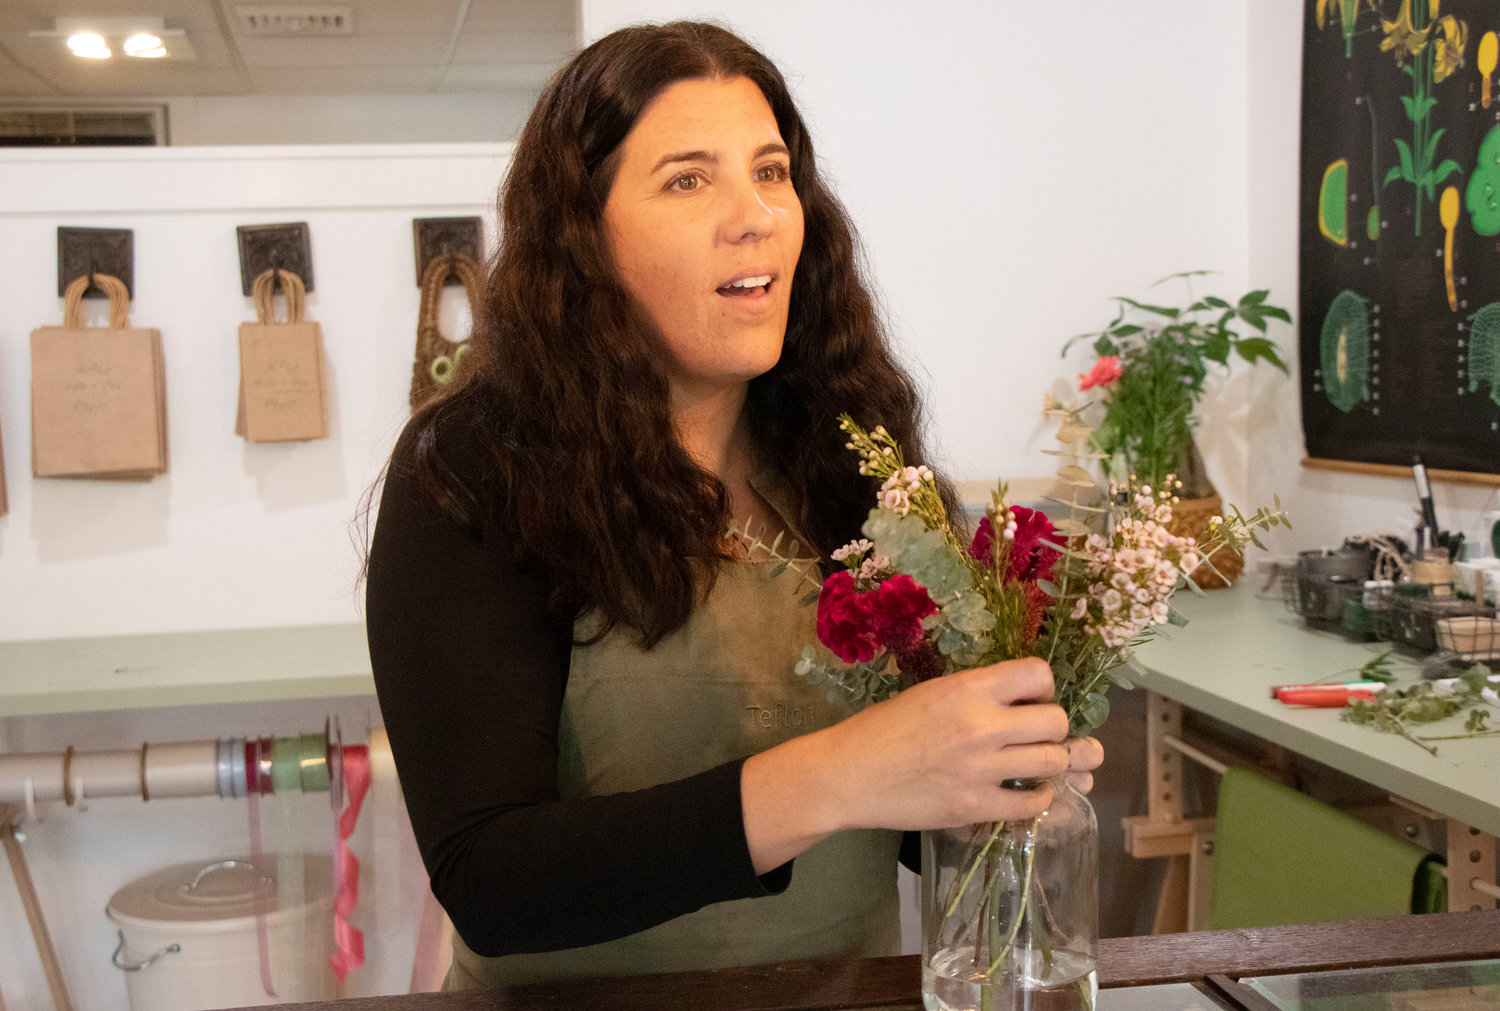 Floral designer Chelsey Barton-Karnes at Thistle & Posy on Gooding Ave., the realization of her longtime dream to have her own flower shop. She likes to carry a selection of unique blooms and plants, locally sourced whenever possible. Barton-Karnes creates both unique and traditional floral designs for events of all kinds; she also offers same day delivery and floral design workshops.